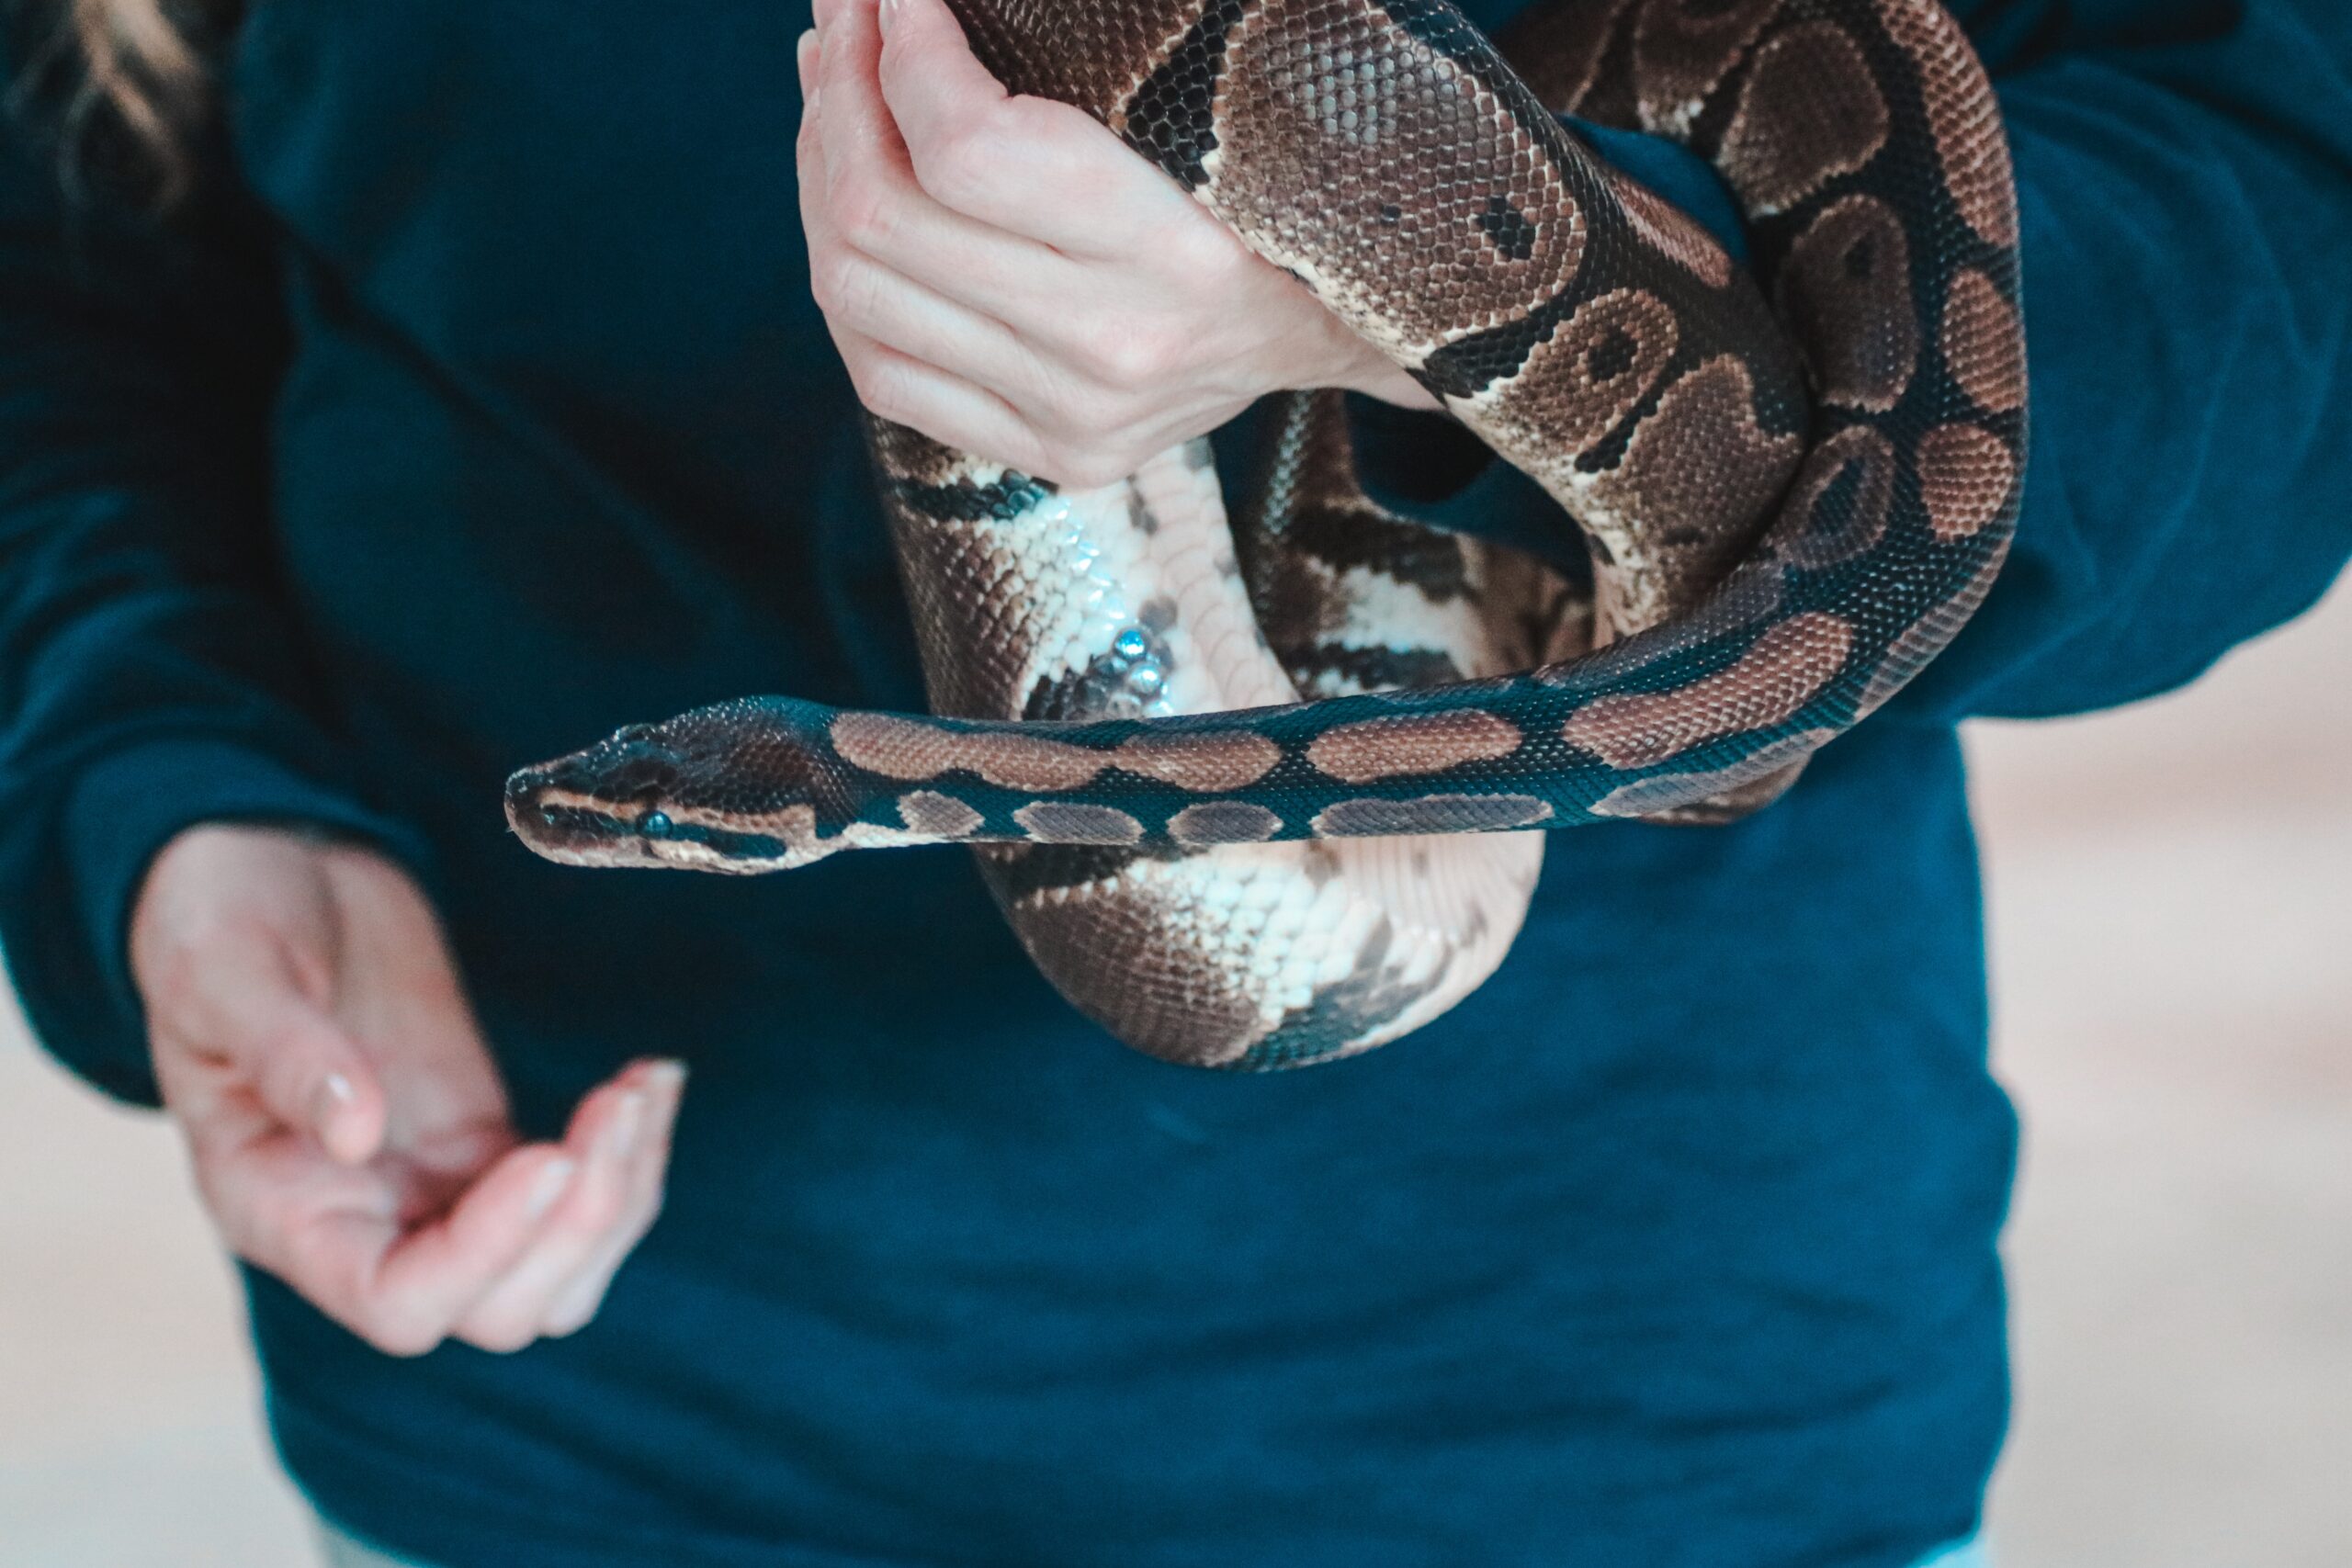 Pros and cons of snakes as pets